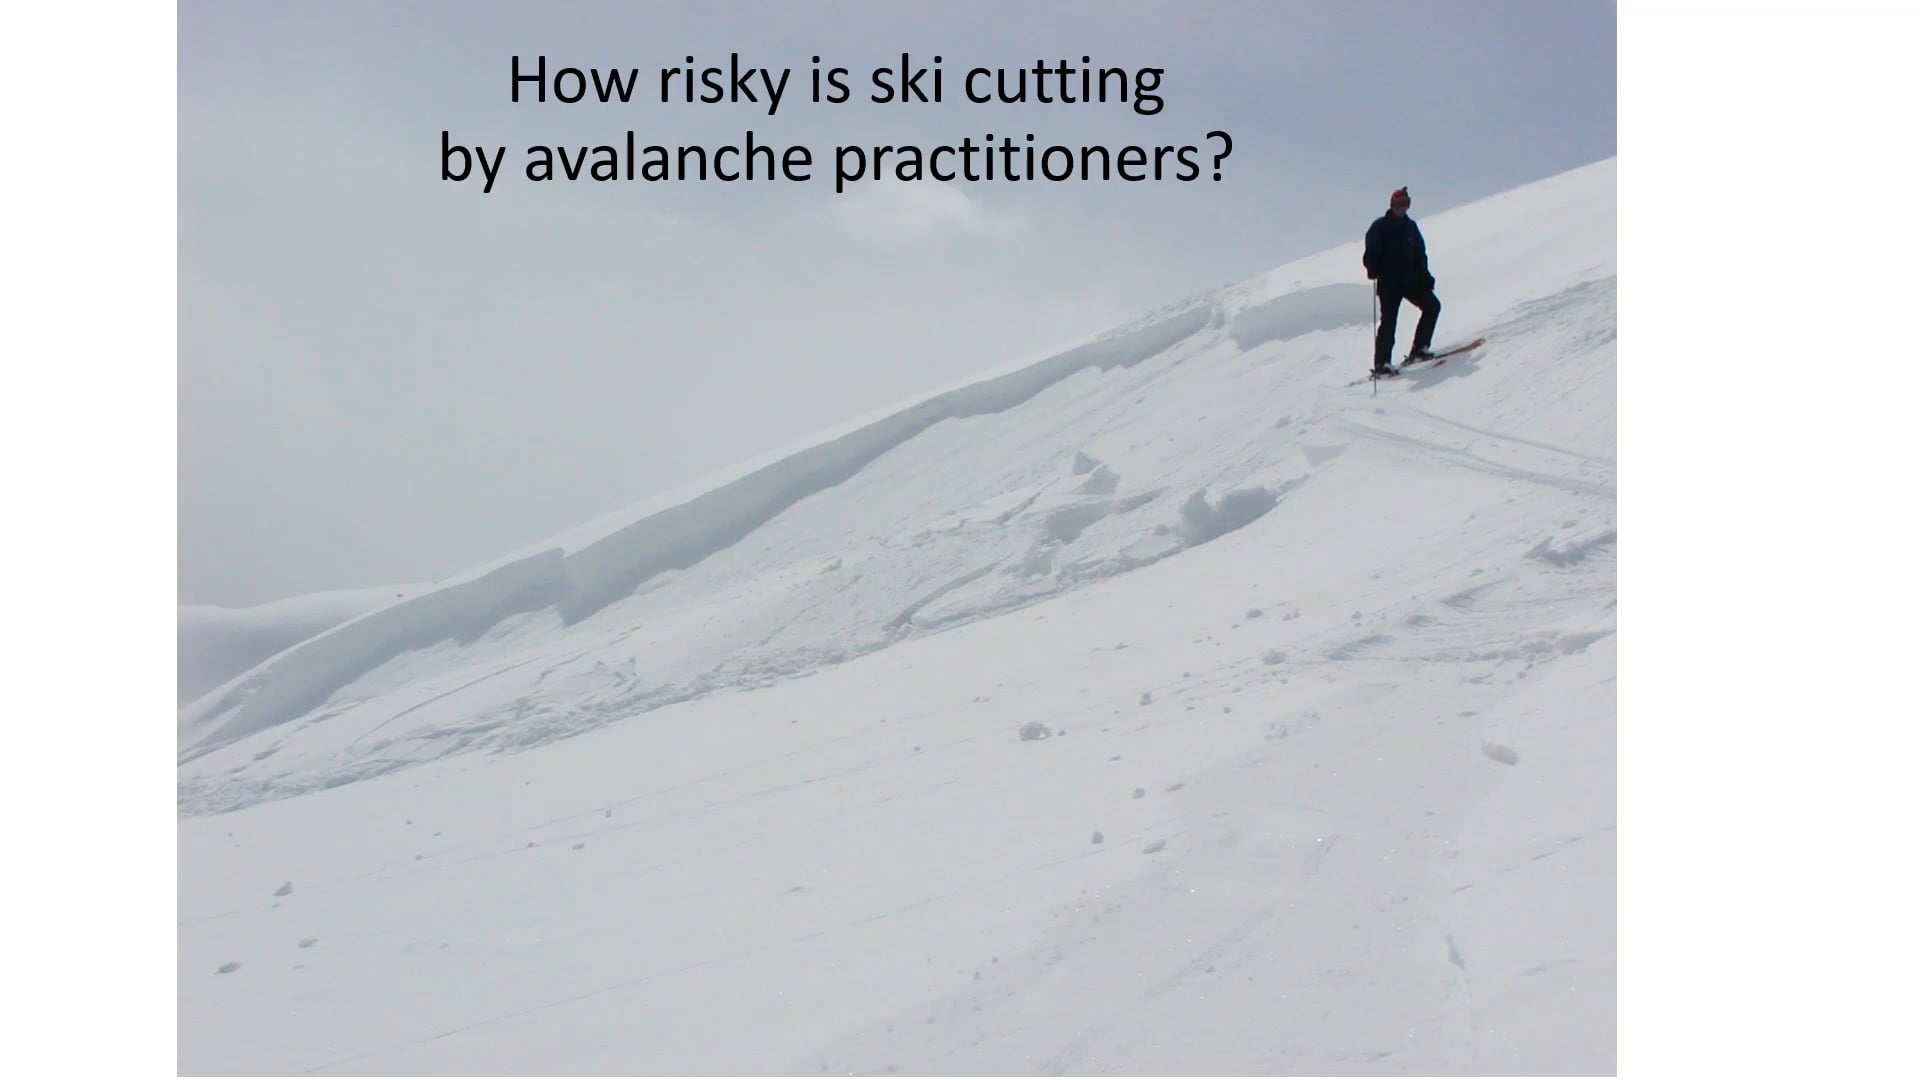 How risky is ski cutting by avalanche practitioners?